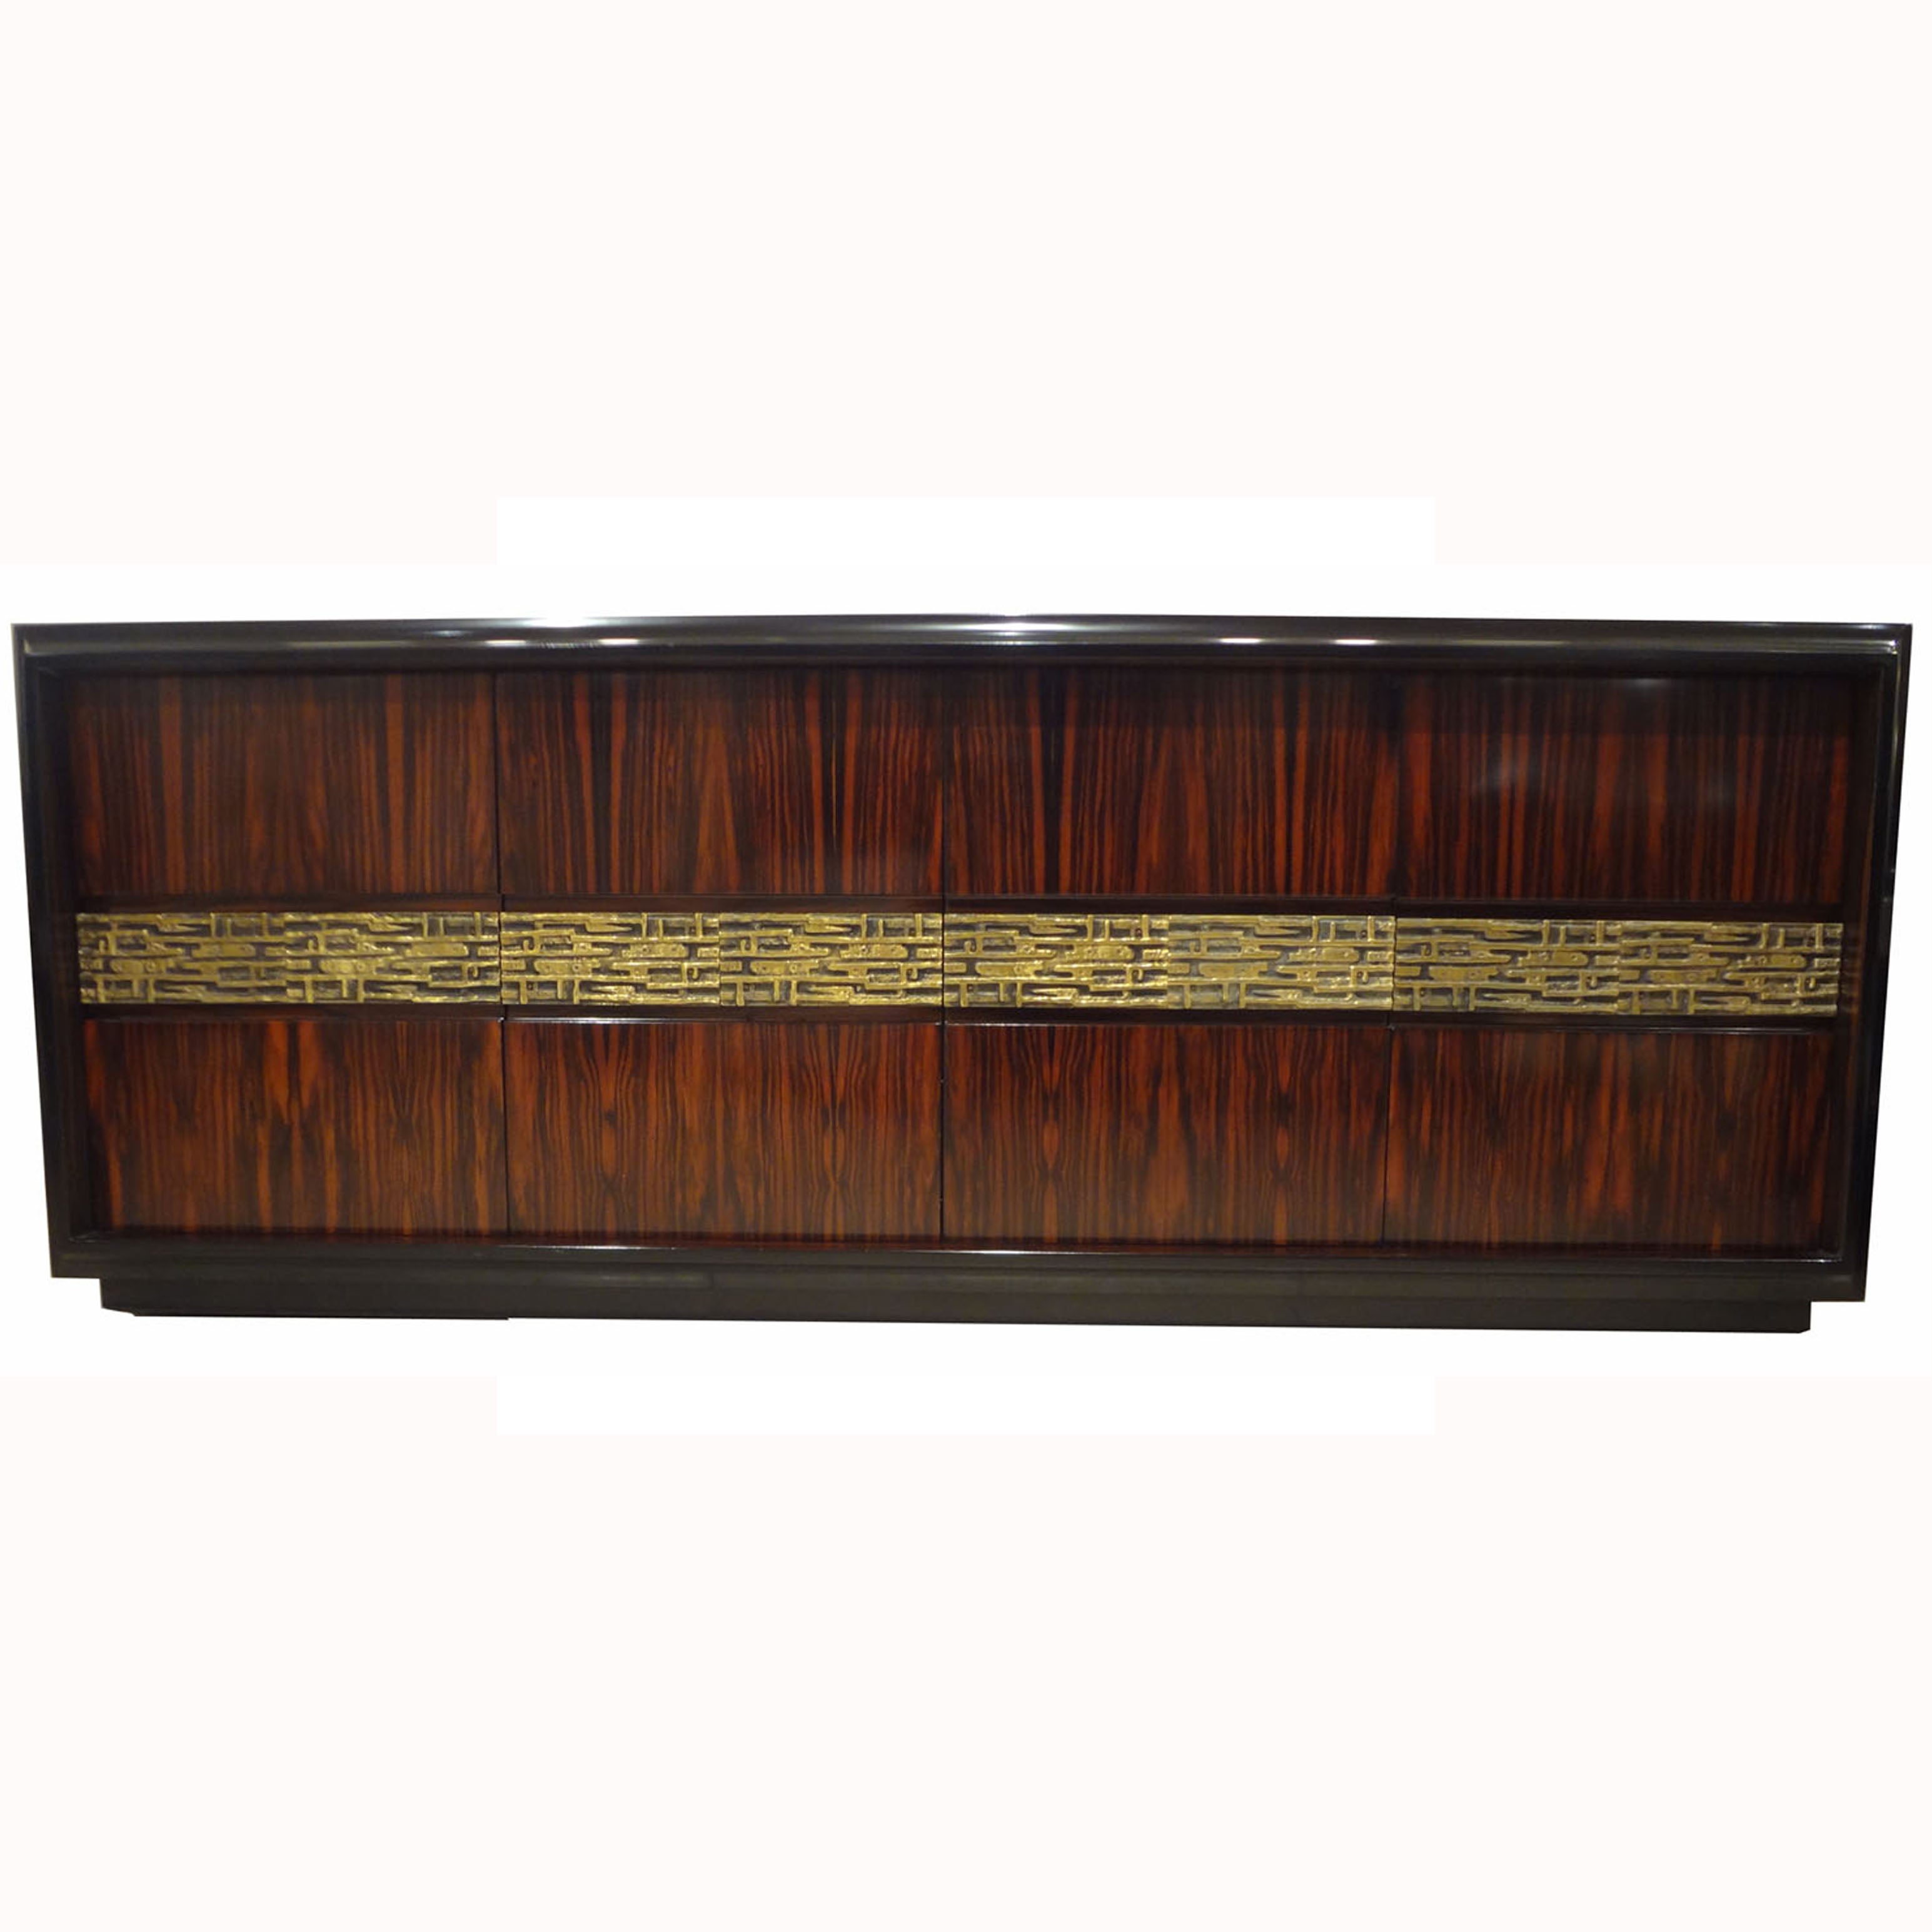 A Low Four Doored Console or Credenza in Palisander by Frigerio Di Desio For Sale